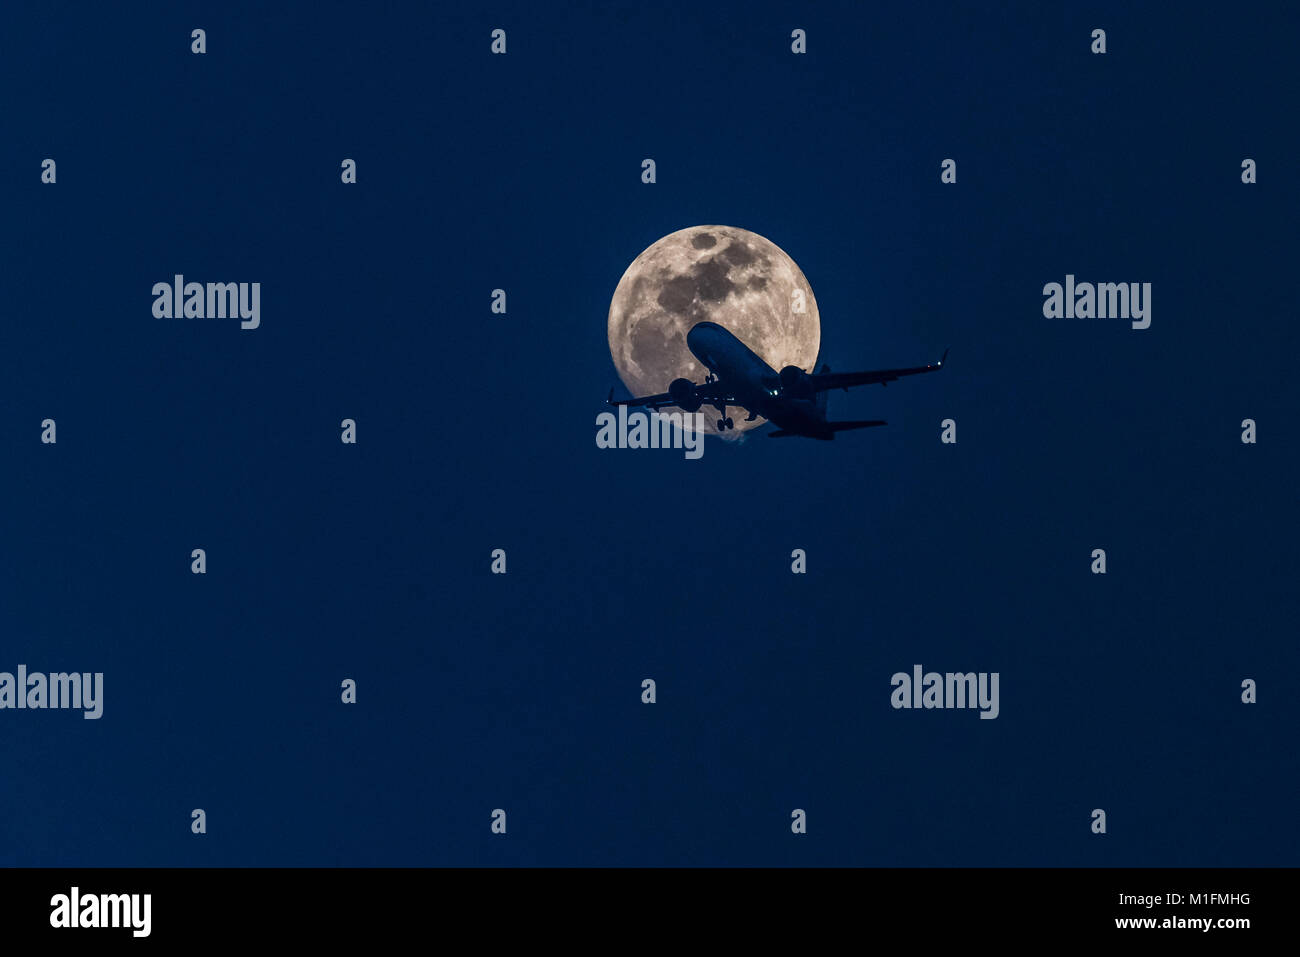 New Delhi, India. 30th Jan, 2018. An aeroplane appears in front of magnificent super-moon a day before lunar eclipse. Credit: Swapan Banik/Alamy Live News Stock Photo